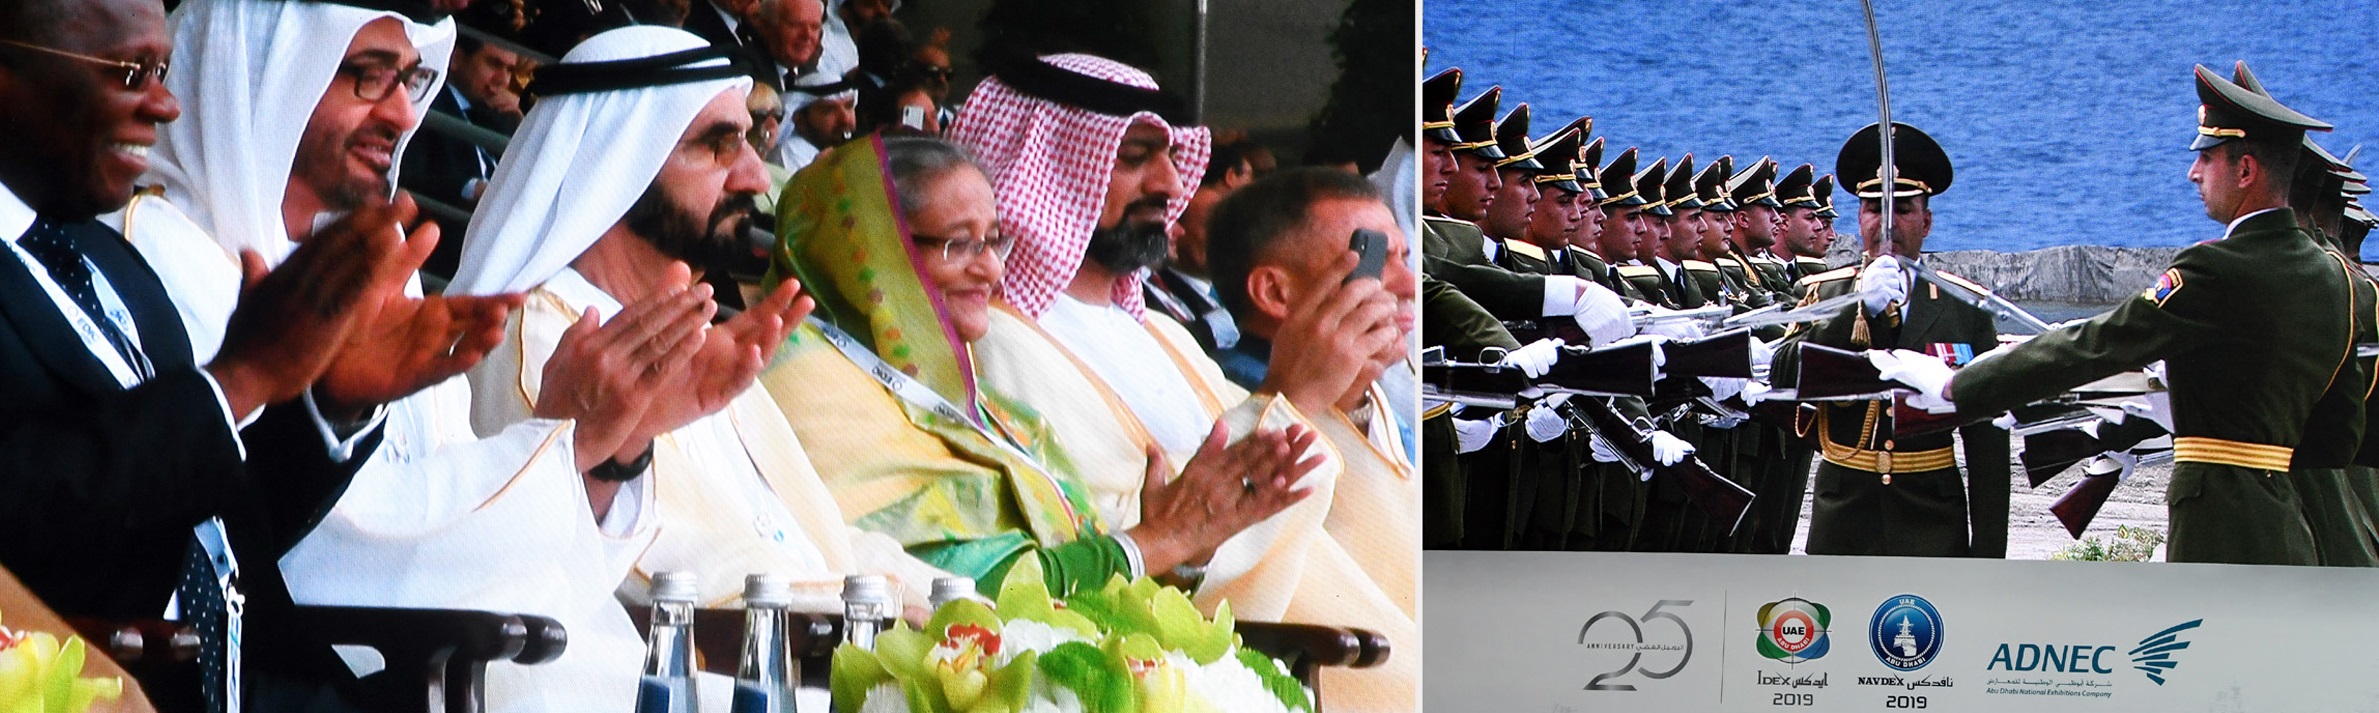 Sheikh Hasina makes special trip to UAE for defence exhibition